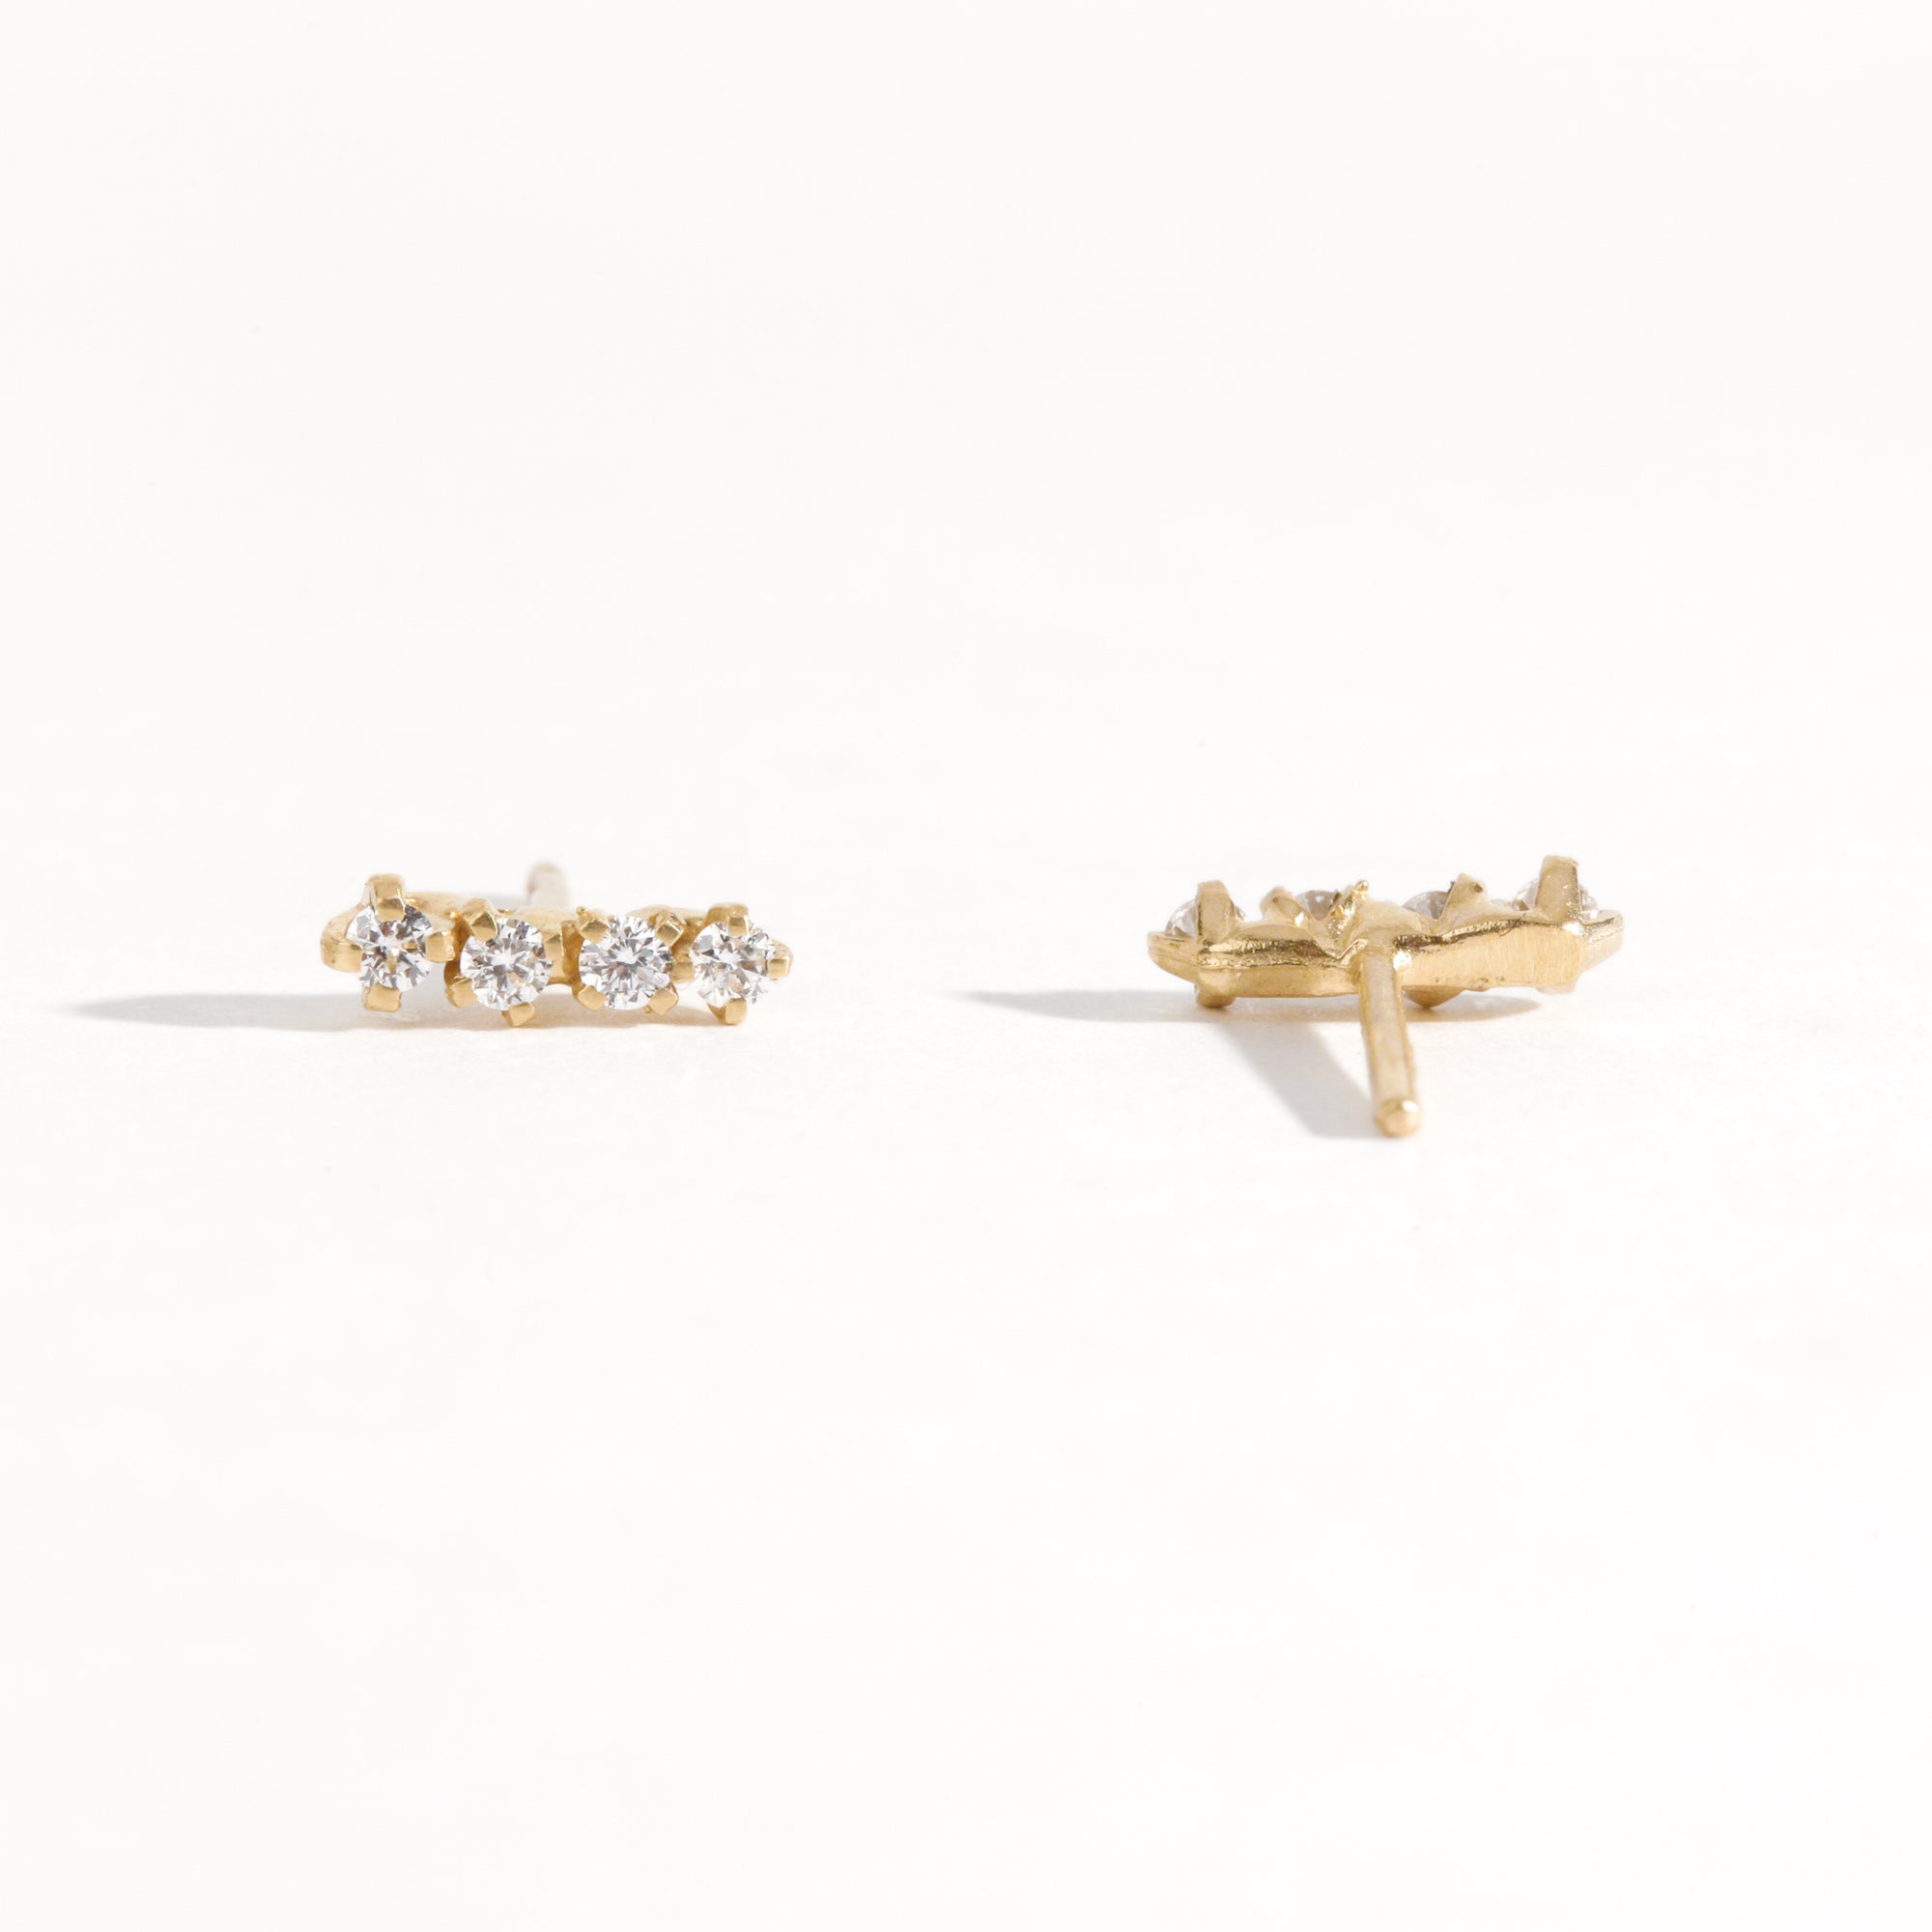 A pair of earring studs crafted with 9ct recycled refined yellow gold with a row of four diamonds by Black Finch Jewellery